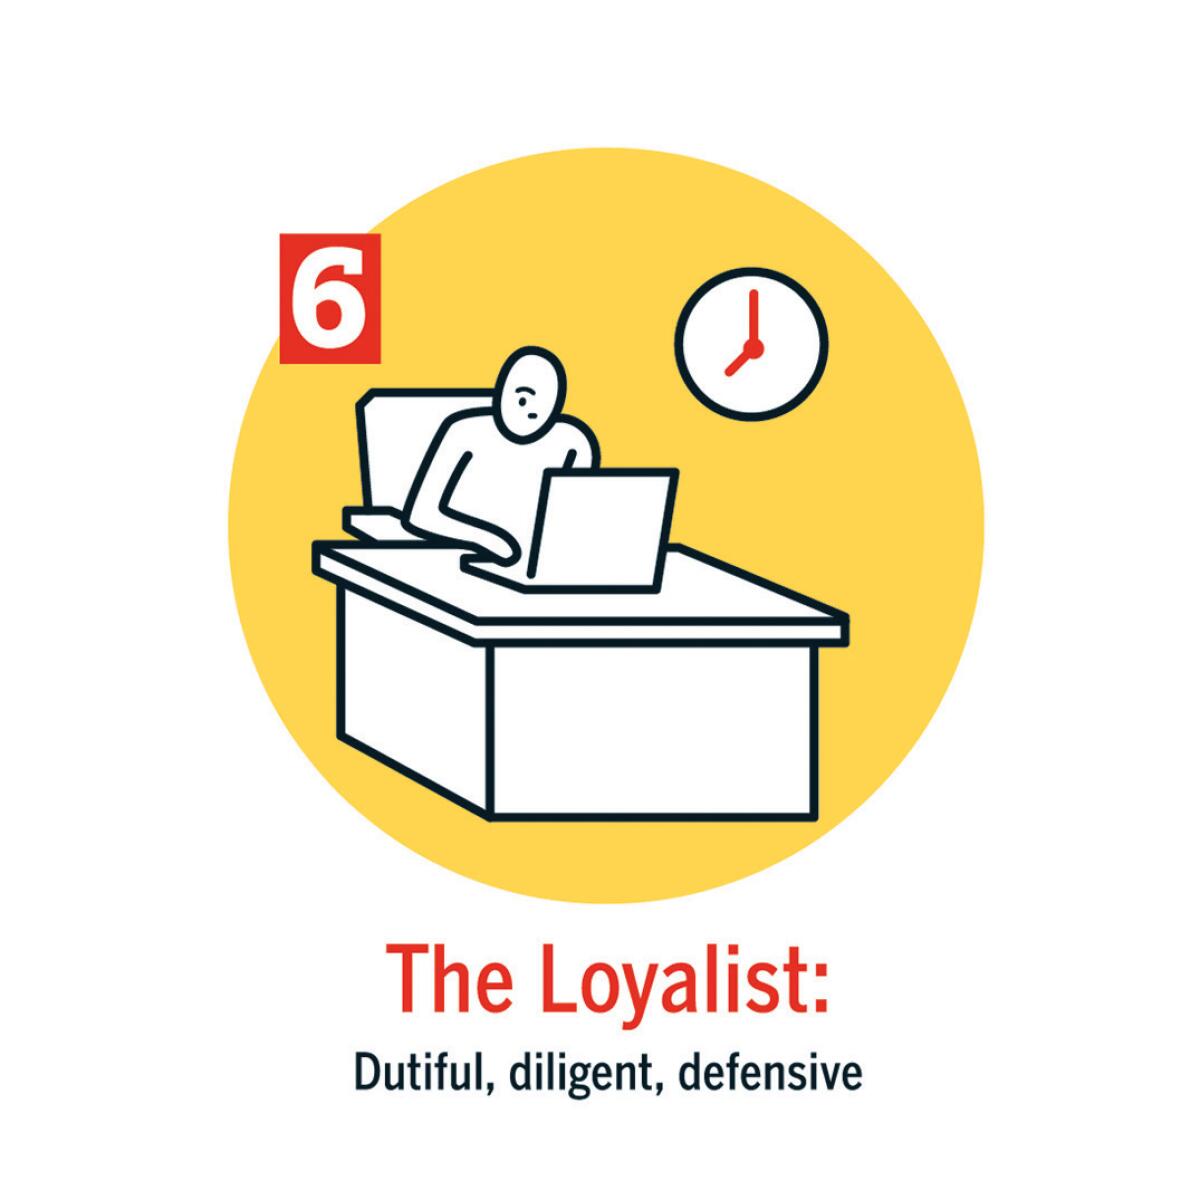 "The Loyalist" is diligent but defensive.